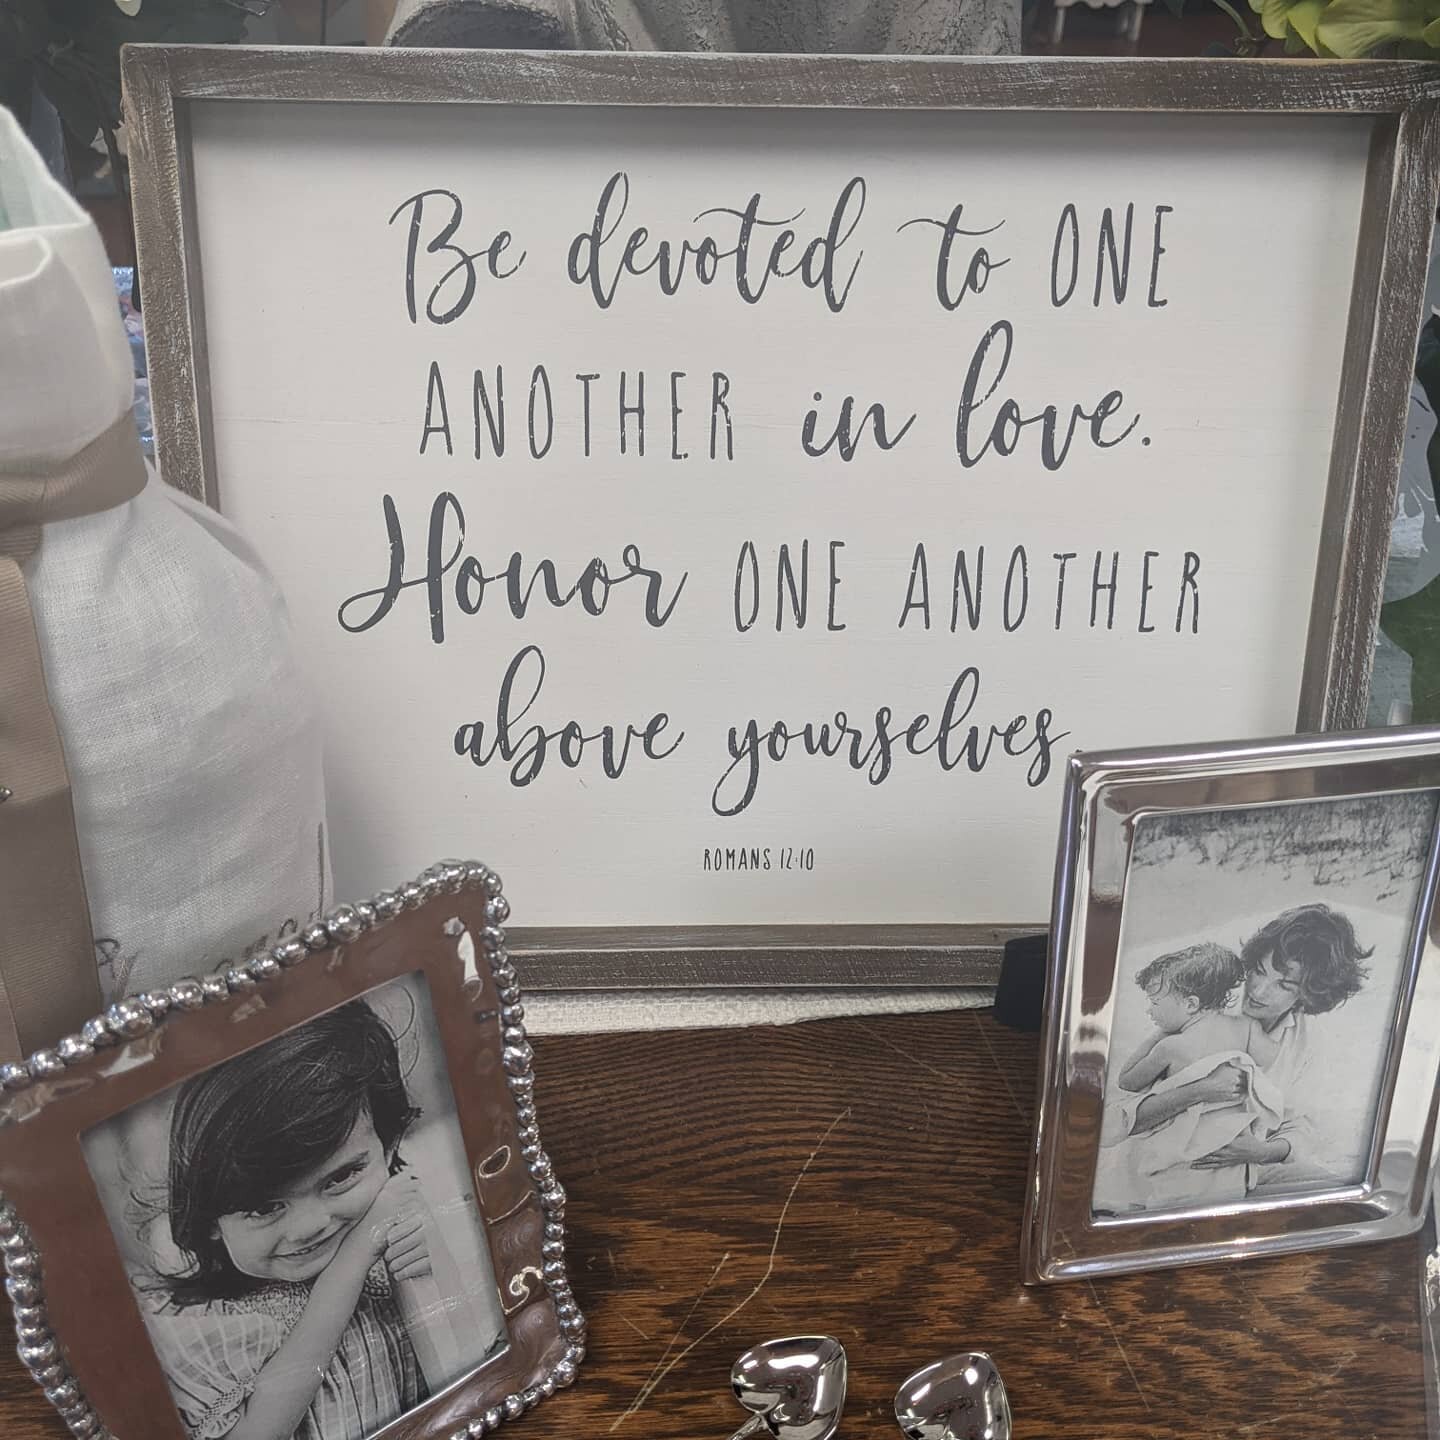 Weddings are happening again!  We have the perfect gifts for engagements, showers and weddings!
.
.
.
.
#allsaintswinterpark #shopwinterpark #parkavenuewp #orlandoweddings #winterparkweddingstroll #iluvwinterpark #christiangifts #showergifts